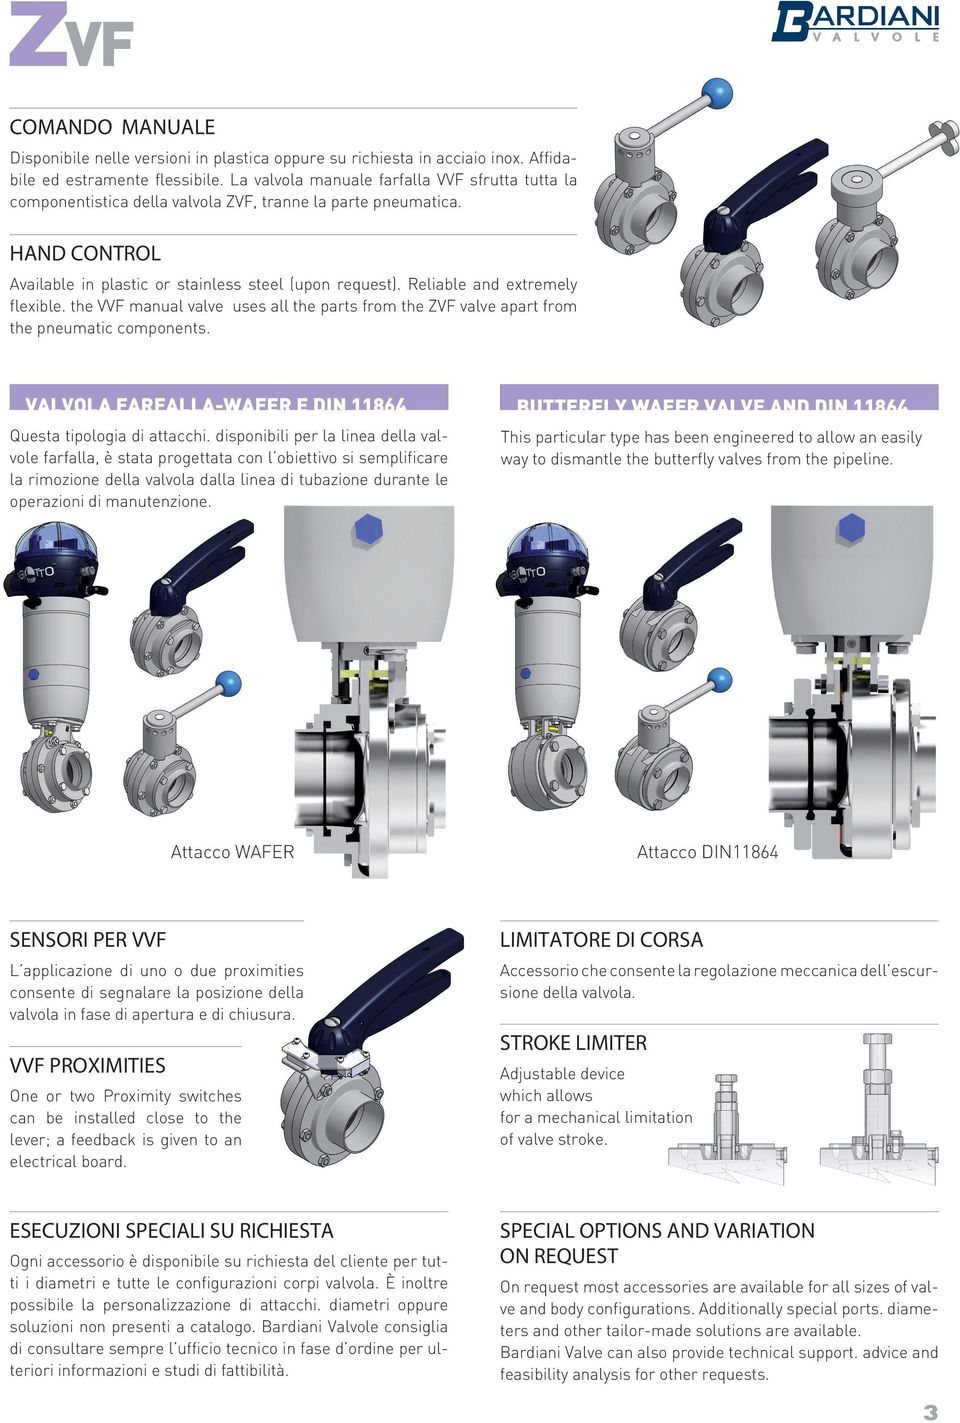 Reliable and extremely flexible. the VVF manual valve uses all the parts from the ZVF valve apart from the pneumatic components. Valvola farfalla-wafer e Din 11864 Questa tipologia di attacchi.